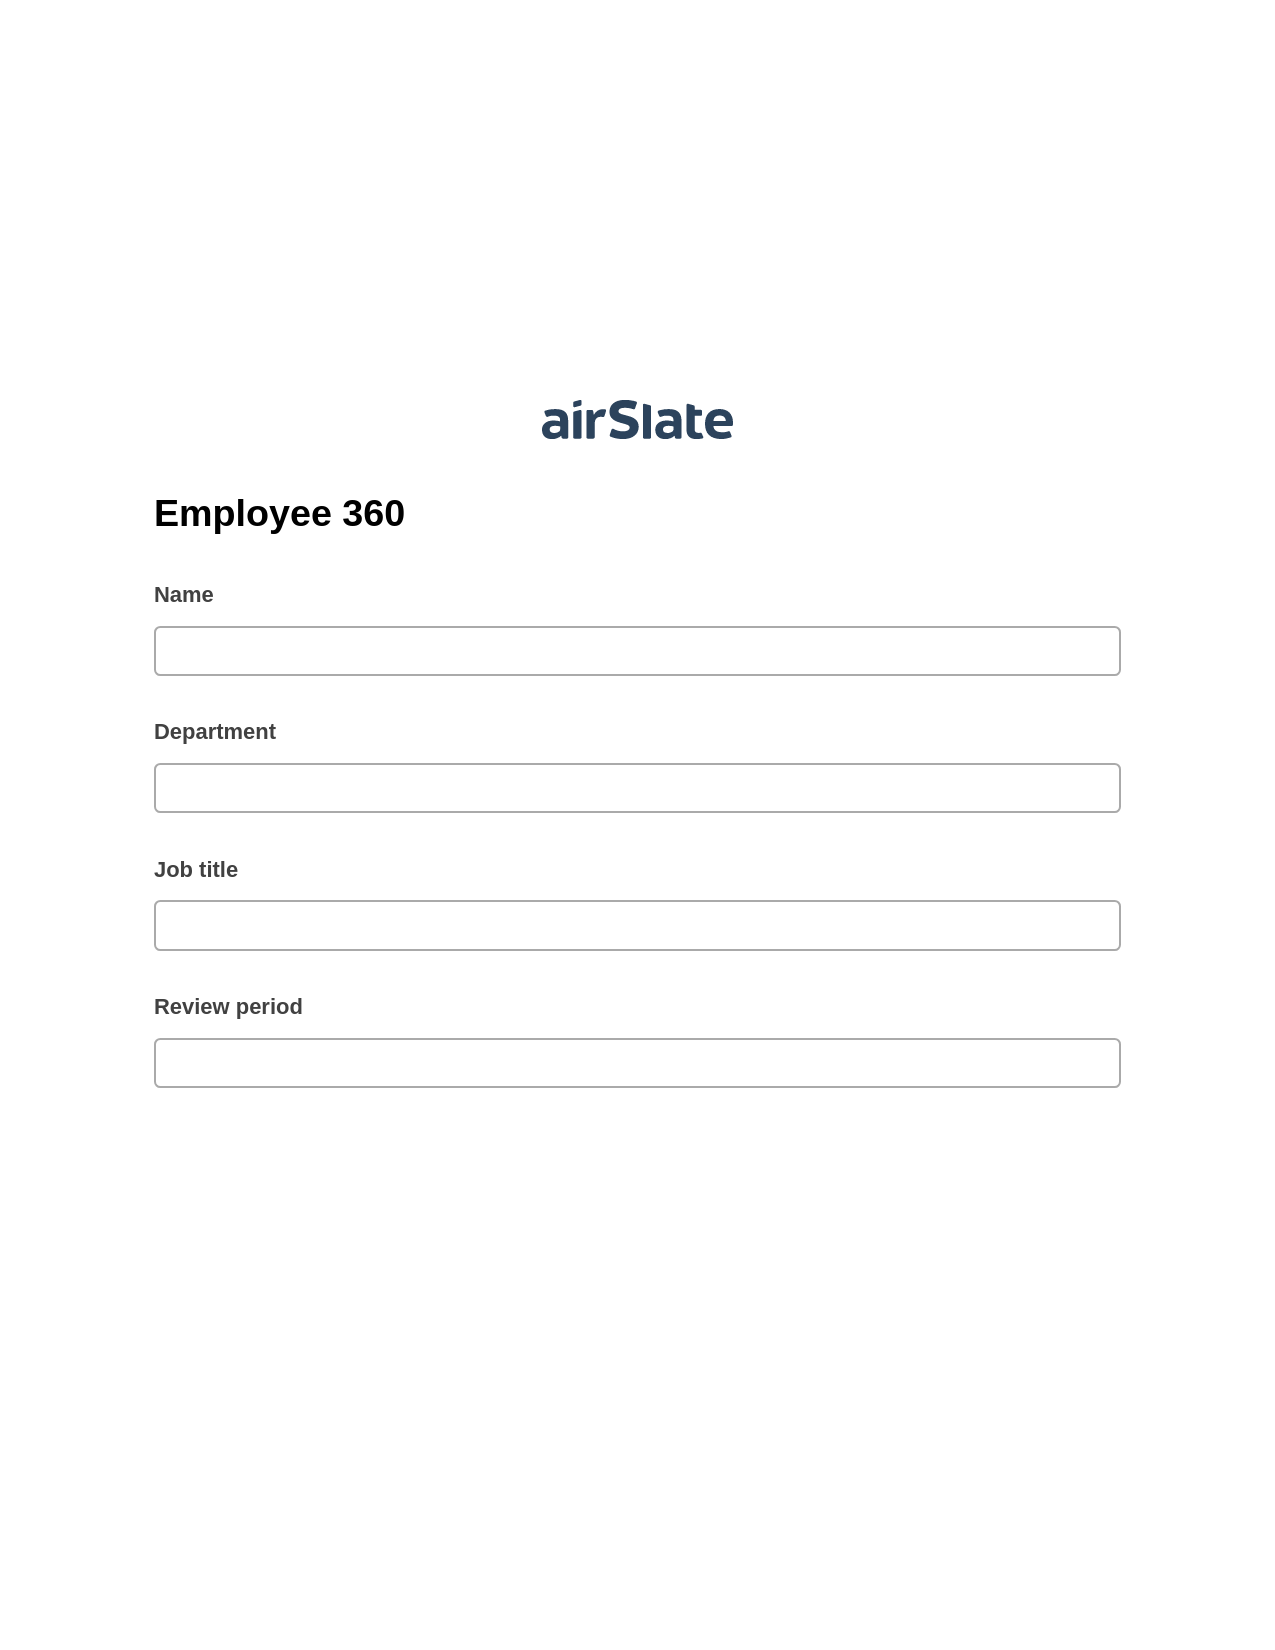 Employee 360 Pre-fill from another Slate Bot, Google Cloud Print Bot, Export to Excel 365 Bot